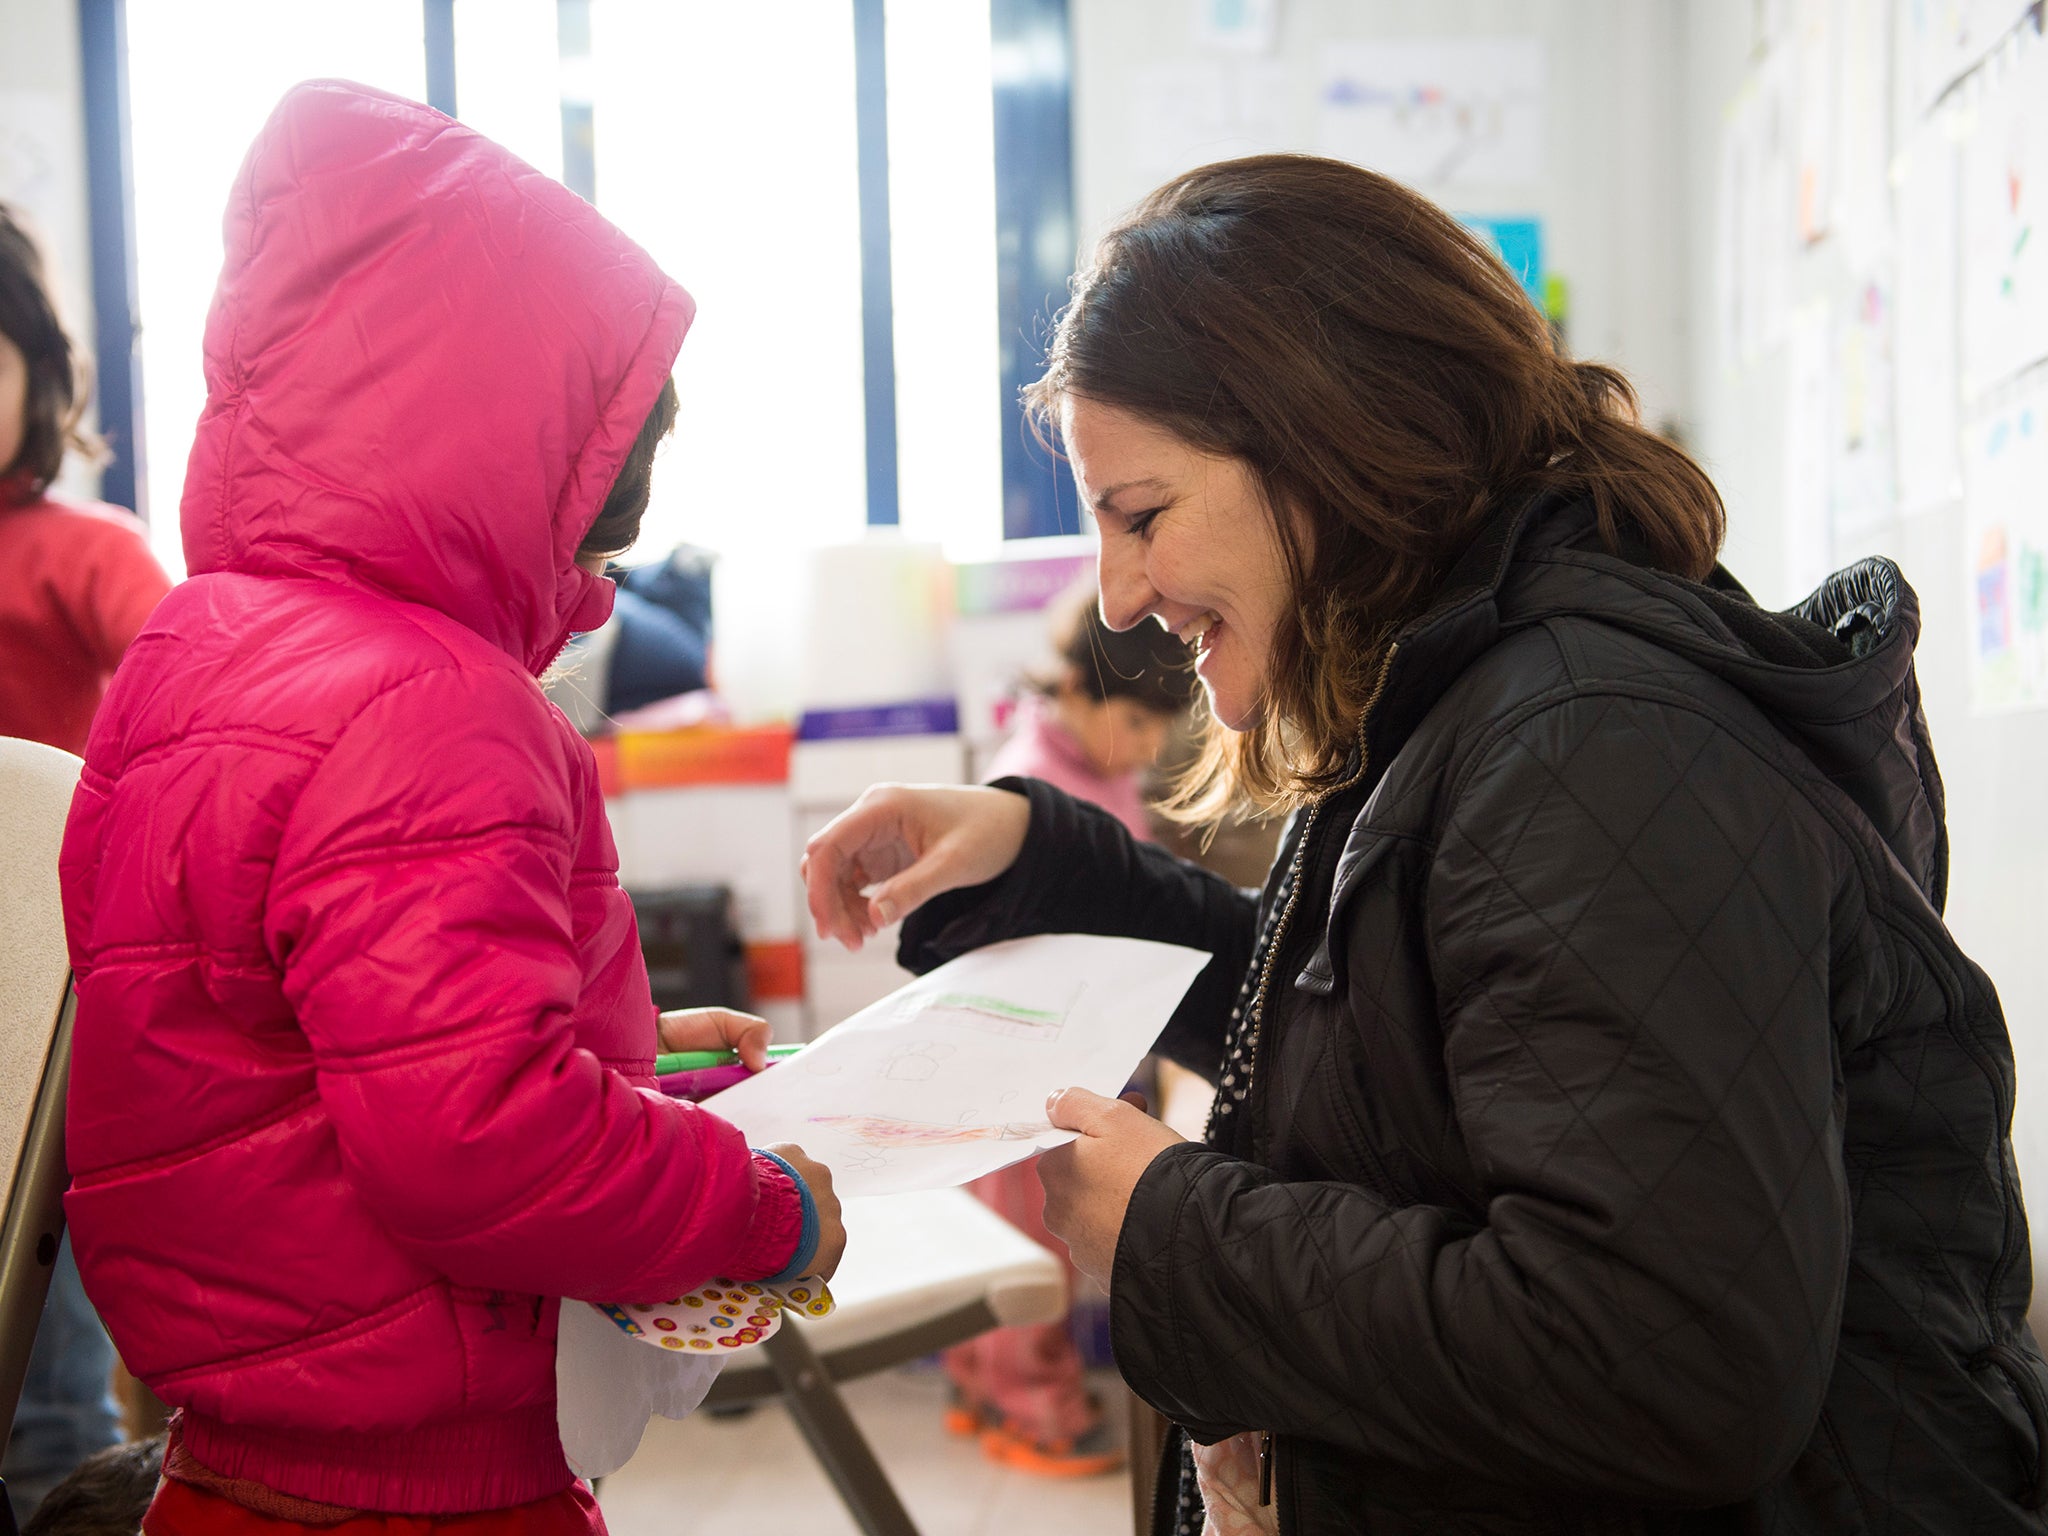 Caroline Ansell chats to a Syrian refugee in Save the Children's Child Friendly Space at Kara Tepe (Matt Crossick/Save The Children)